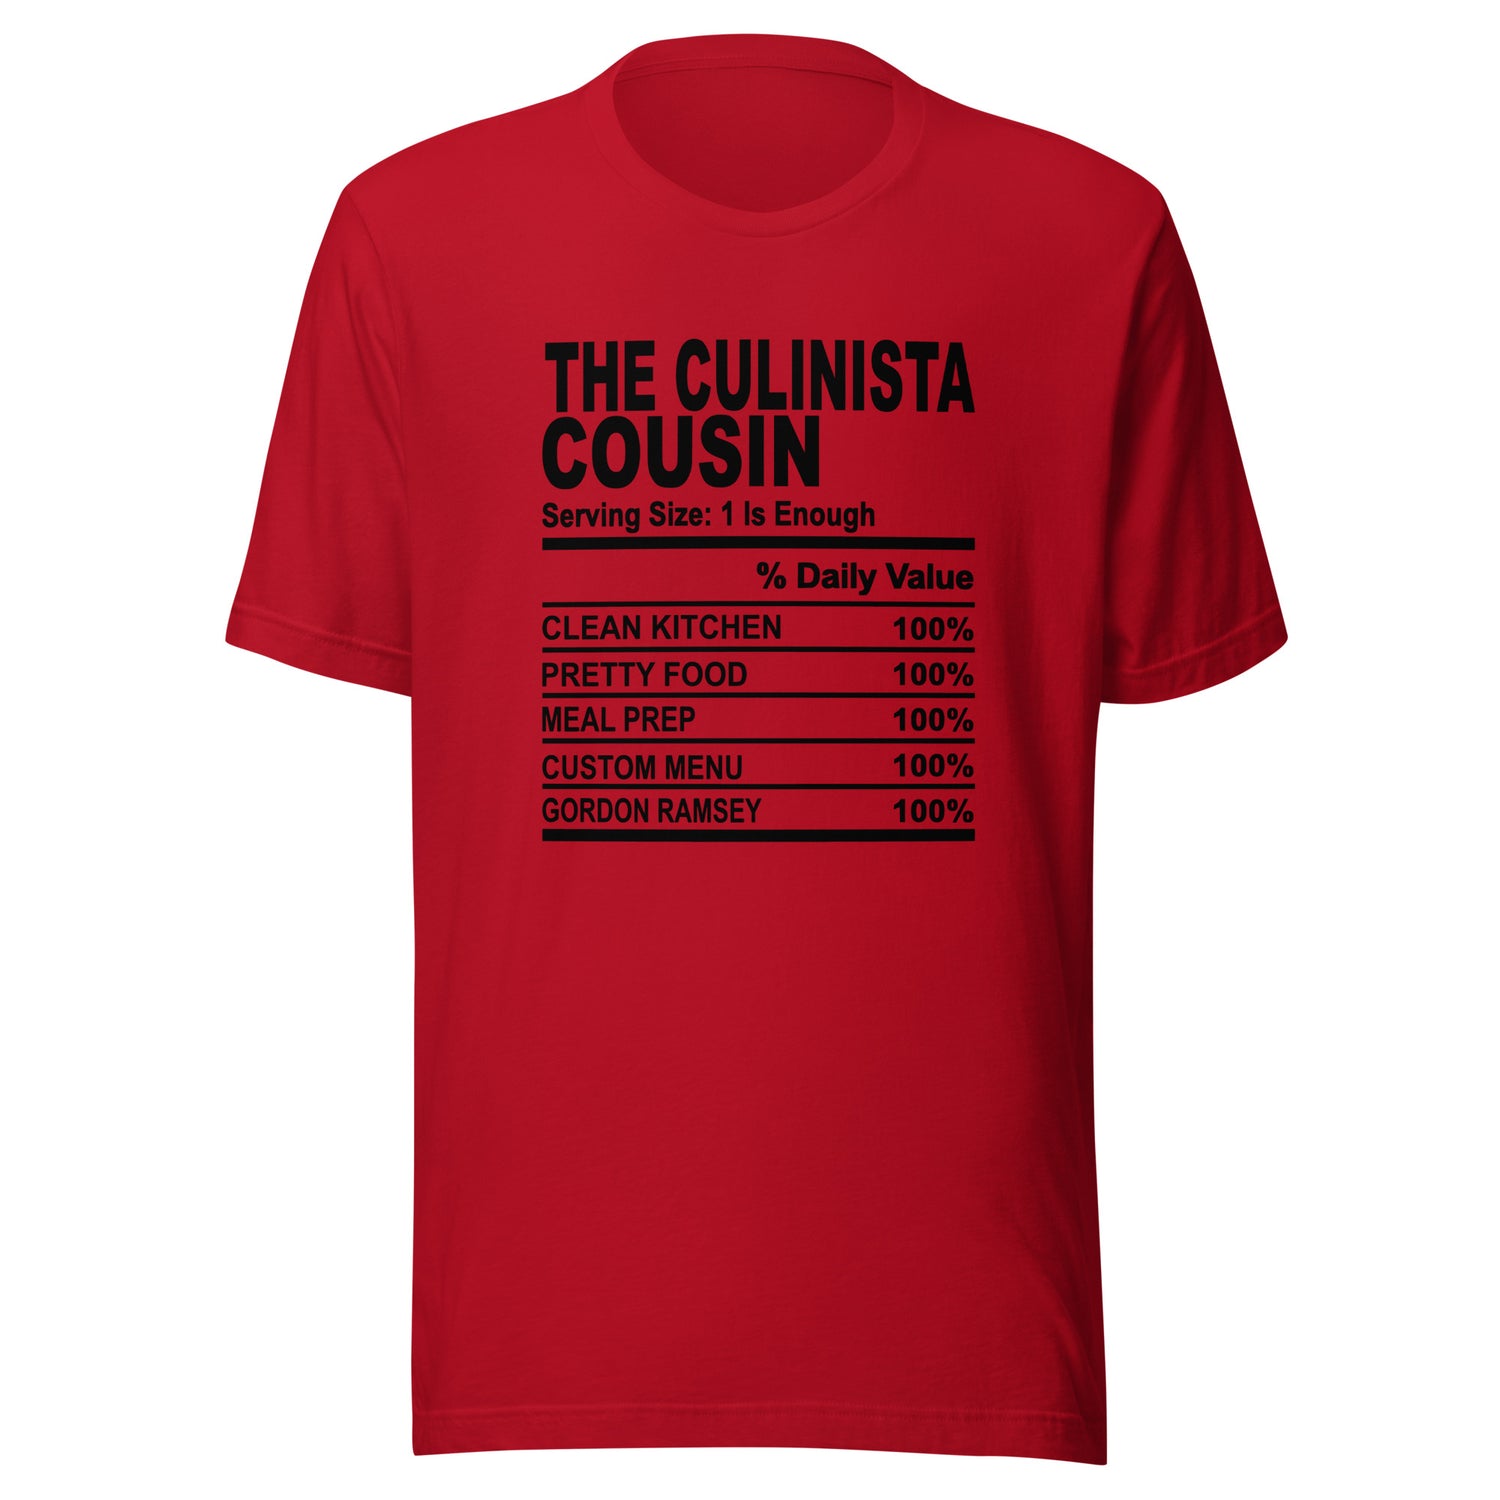 Culinista Cousin Tees